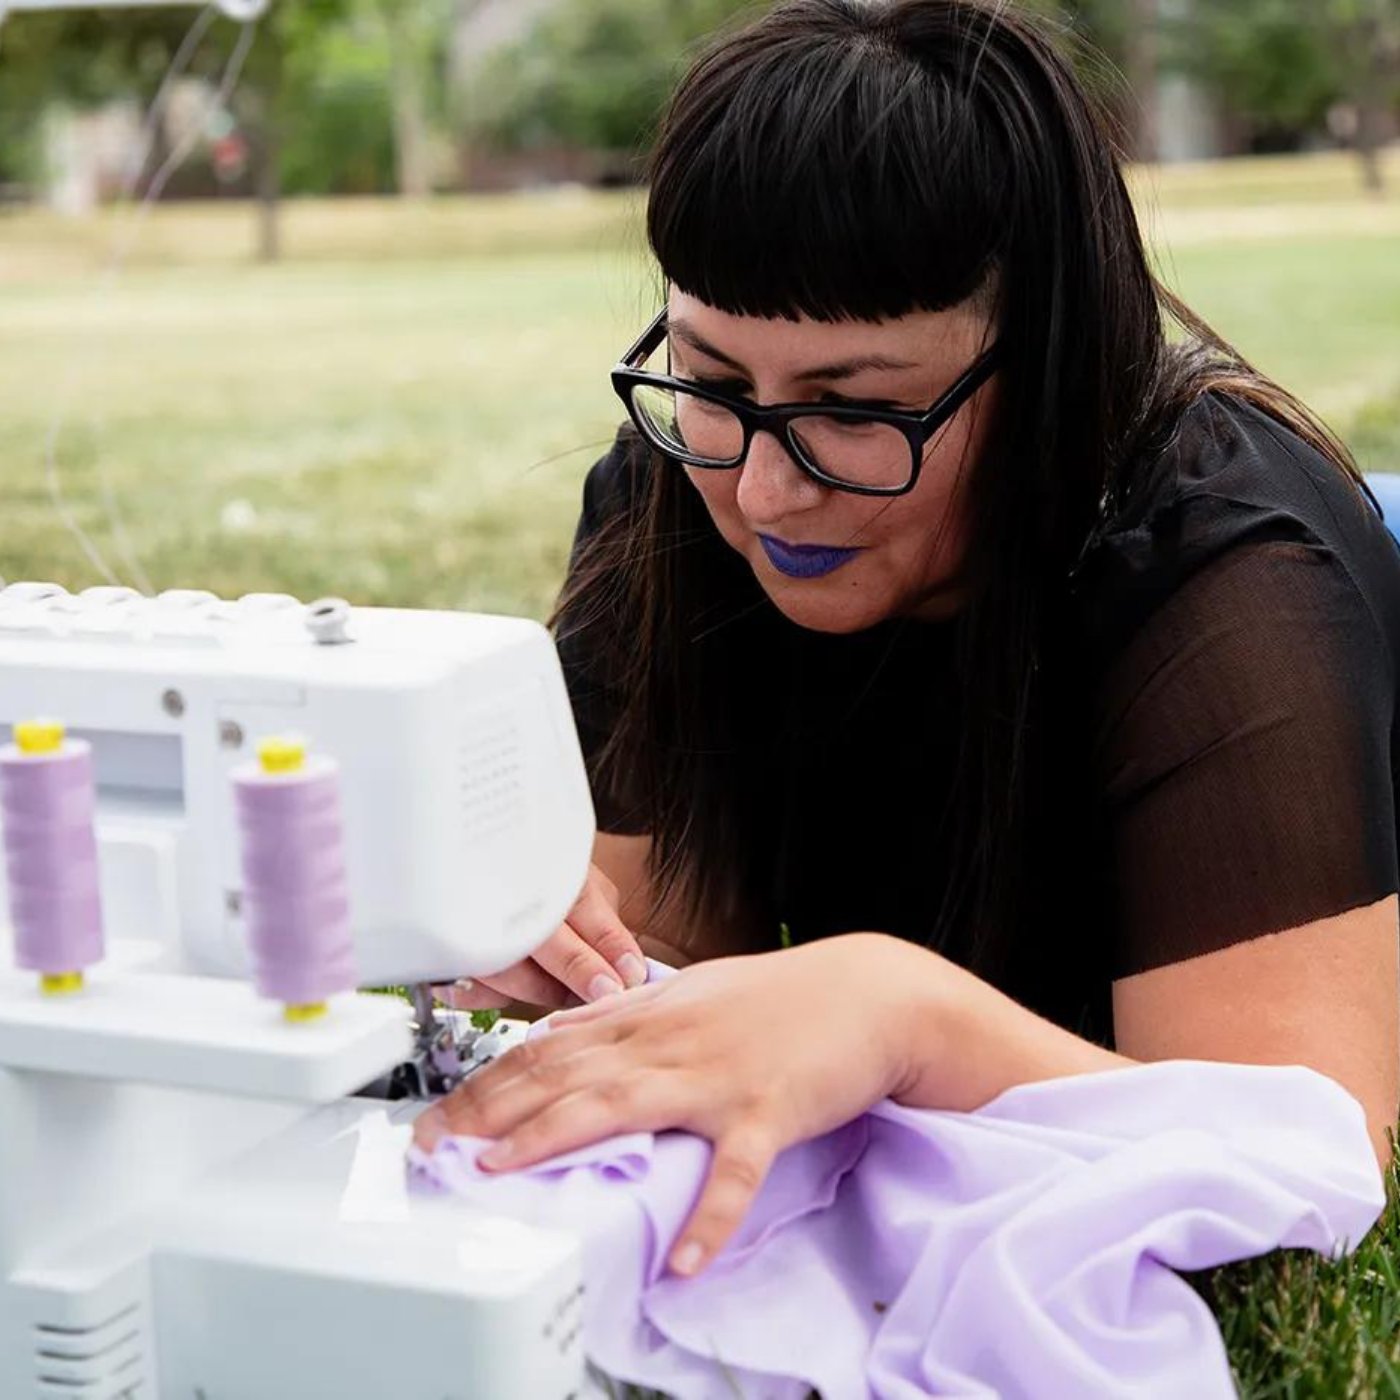 Mel Martinez sews purple fabric with two spools of purple thread visible on a serger. Mel is laying down in the grass with the sewing machine in front of her.